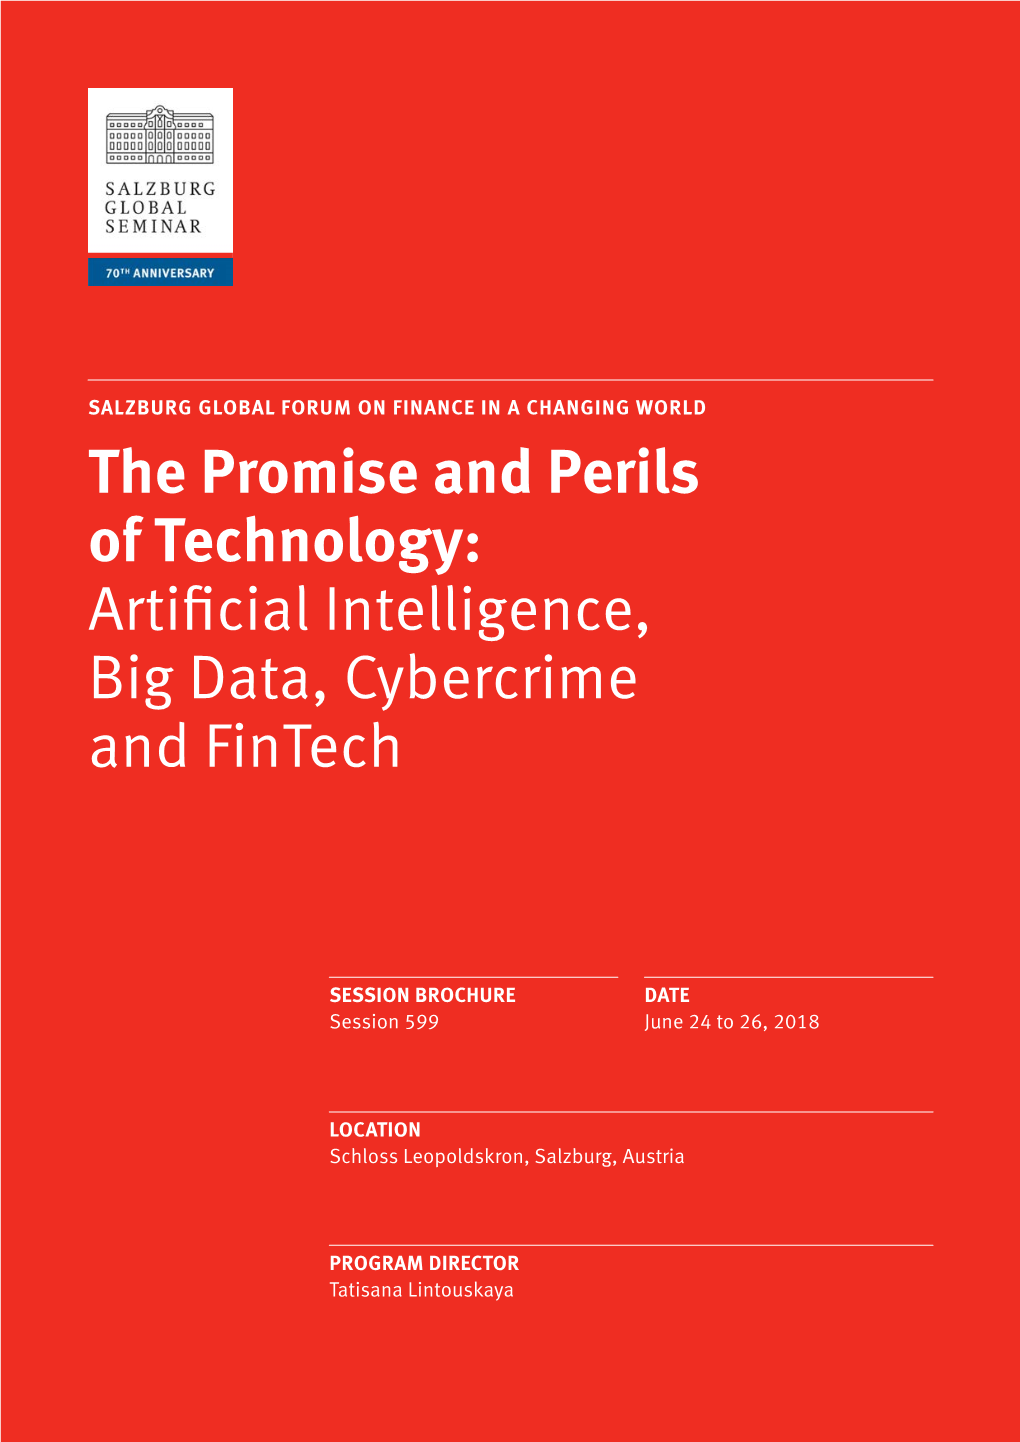 The Promise and Perils of Technology: Artificial Intelligence, Big Data, Cybercrime and Fintech